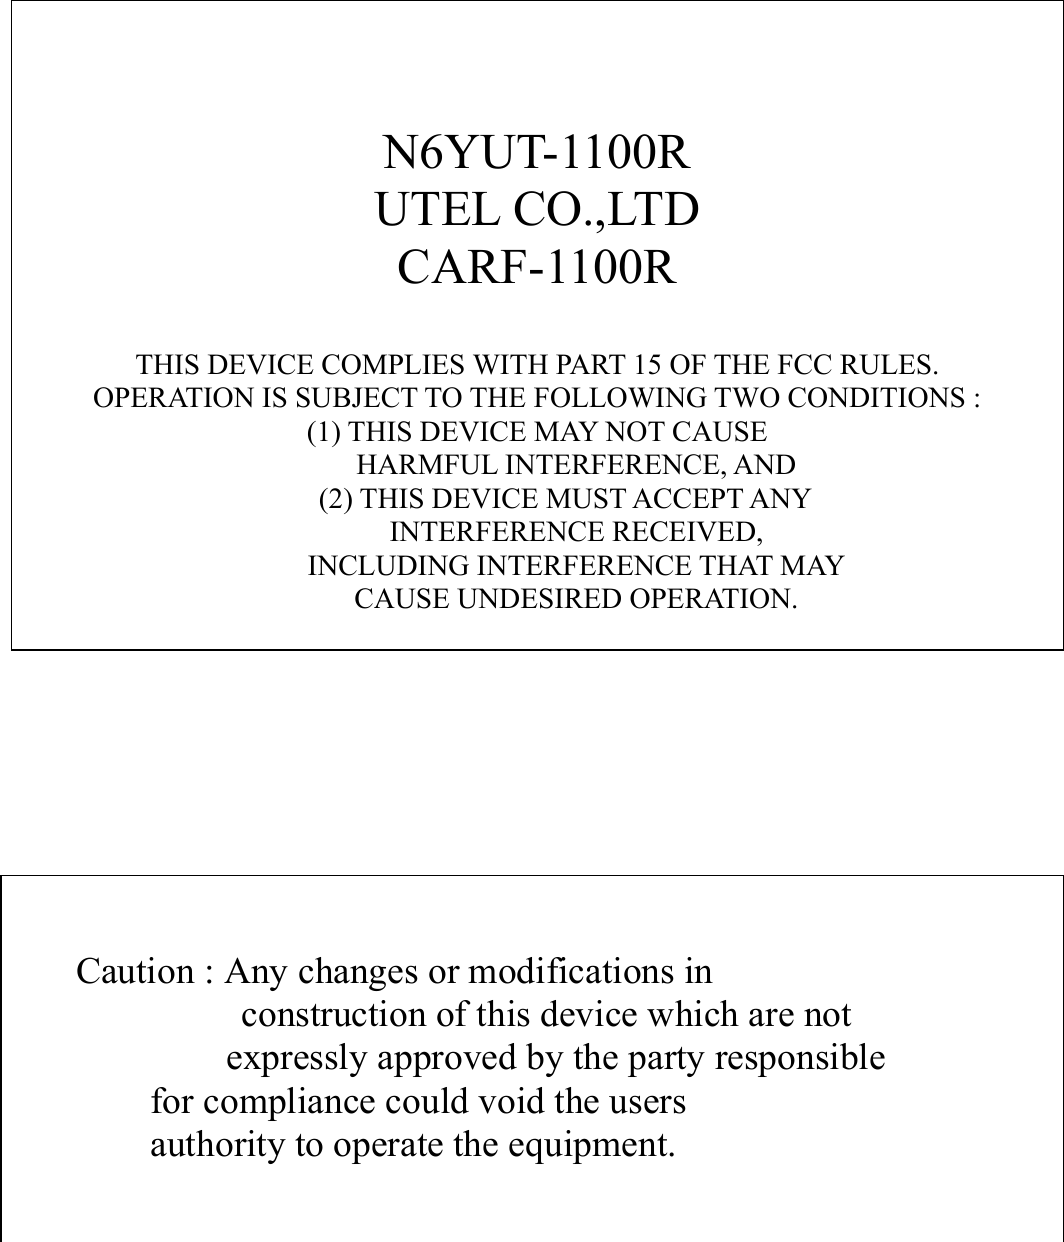 N6YUT-1100RUTEL CO.,LTDCARF-1100RTHIS DEVICE COMPLIES WITH PART 15 OF THE FCC RULES.OPERATION IS SUBJECT TO THE FOLLOWING TWO CONDITIONS :(1) THIS DEVICE MAY NOT CAUSEHARMFUL INTERFERENCE, AND(2) THIS DEVICE MUST ACCEPT ANYINTERFERENCE RECEIVED,INCLUDING INTERFERENCE THAT MAYCAUSE UNDESIRED OPERATION.    Caution : Any changes or modifications in  construction of this device which are not    expressly approved by the party responsible           for compliance could void the users           authority to operate the equipment.